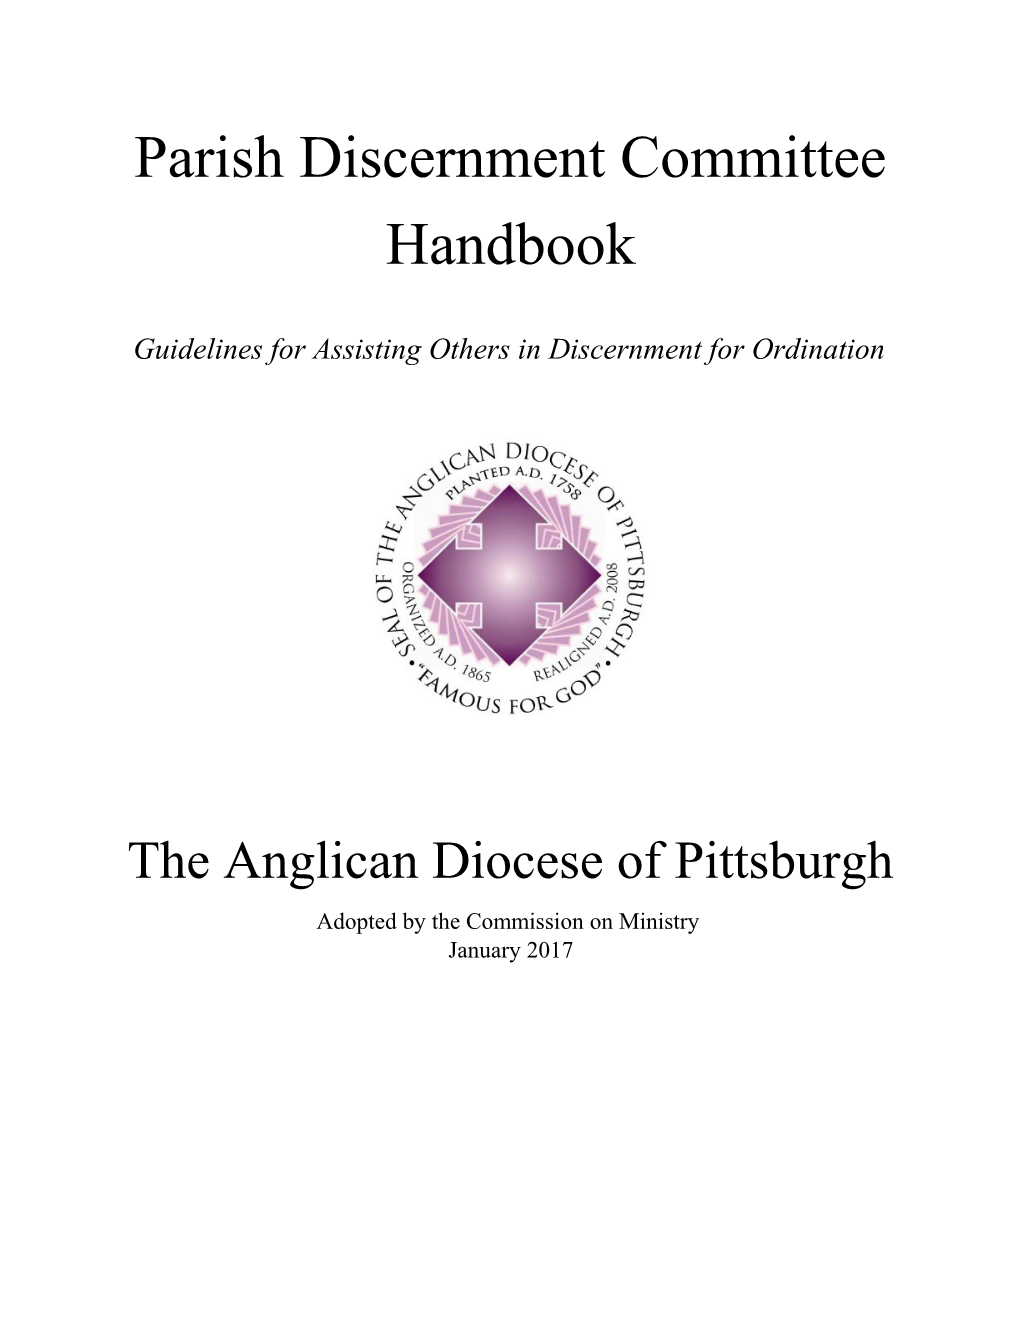 Guidelines for Assisting Others in Discernment for Ordination